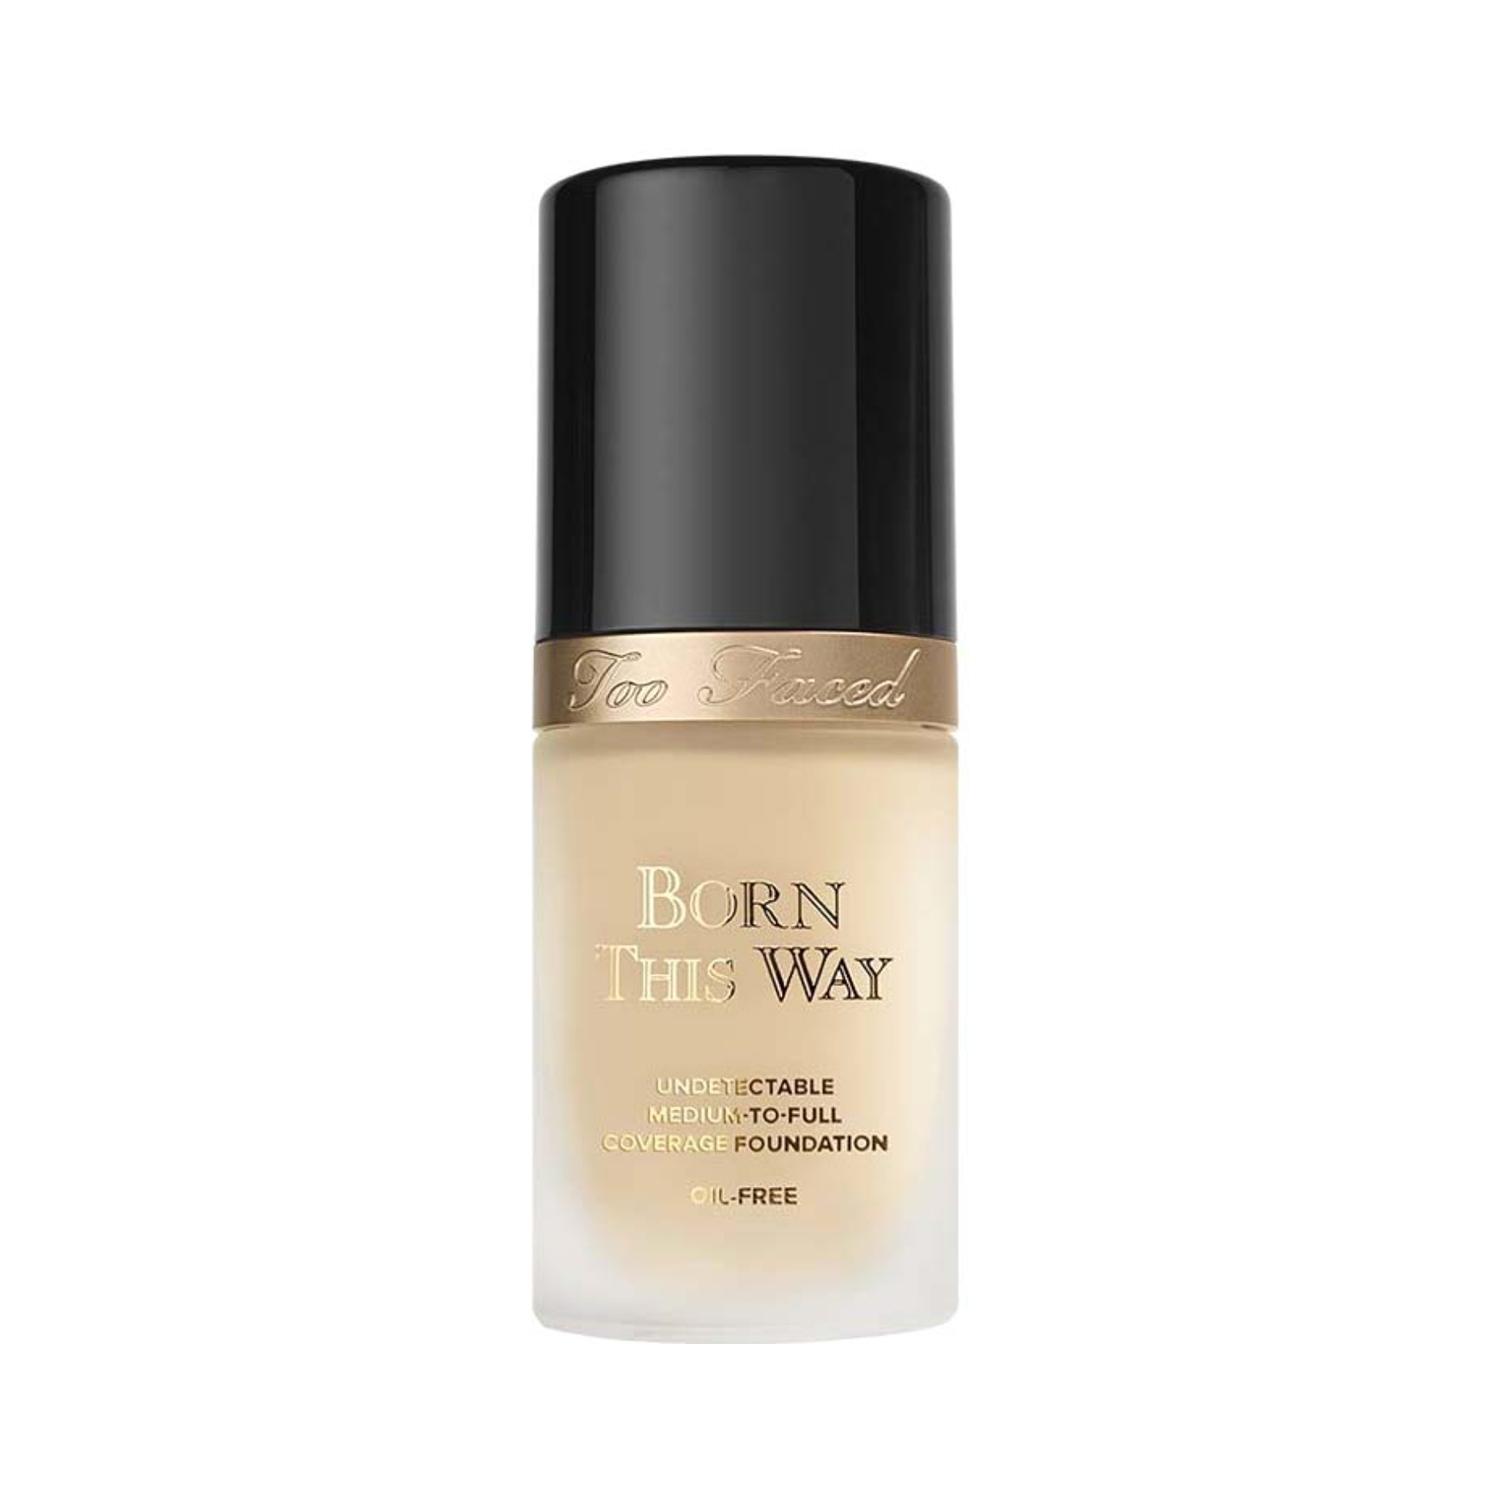 too-faced-born-this-way-foundation---caramel-(30ml)